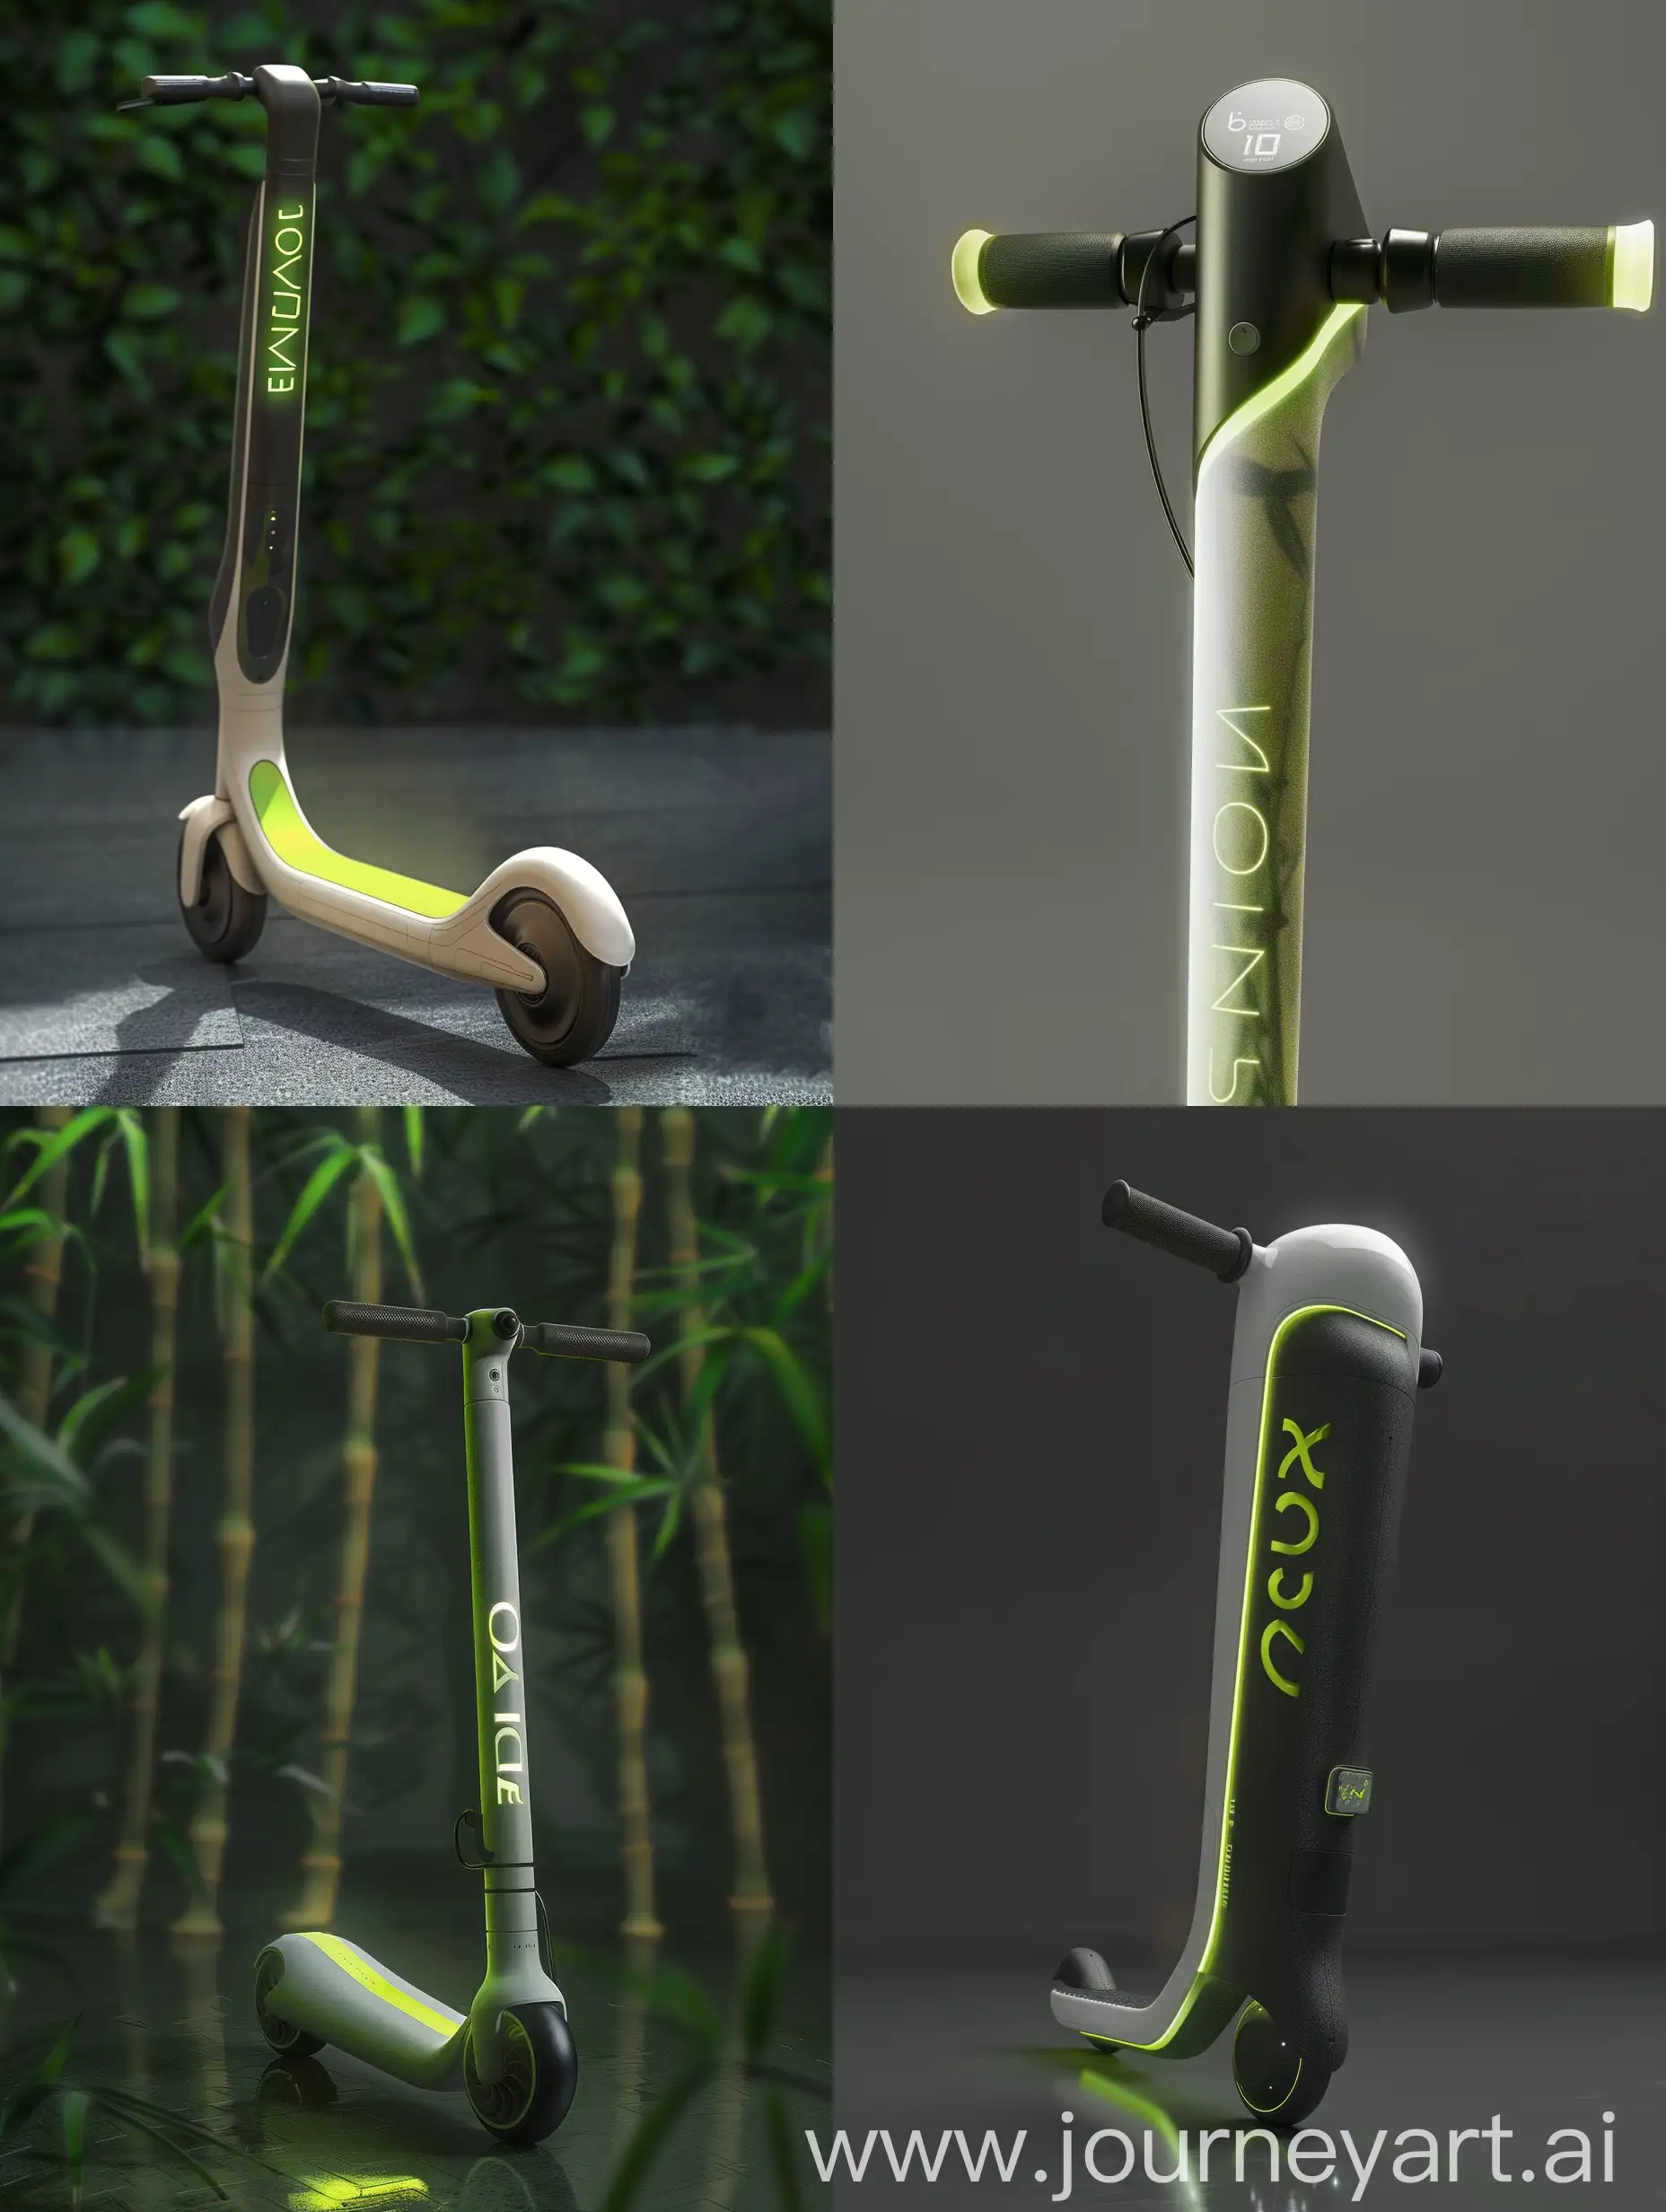 Futuristic-Foldable-EcoFriendly-Electric-Scooter-Inspired-by-Bamboo